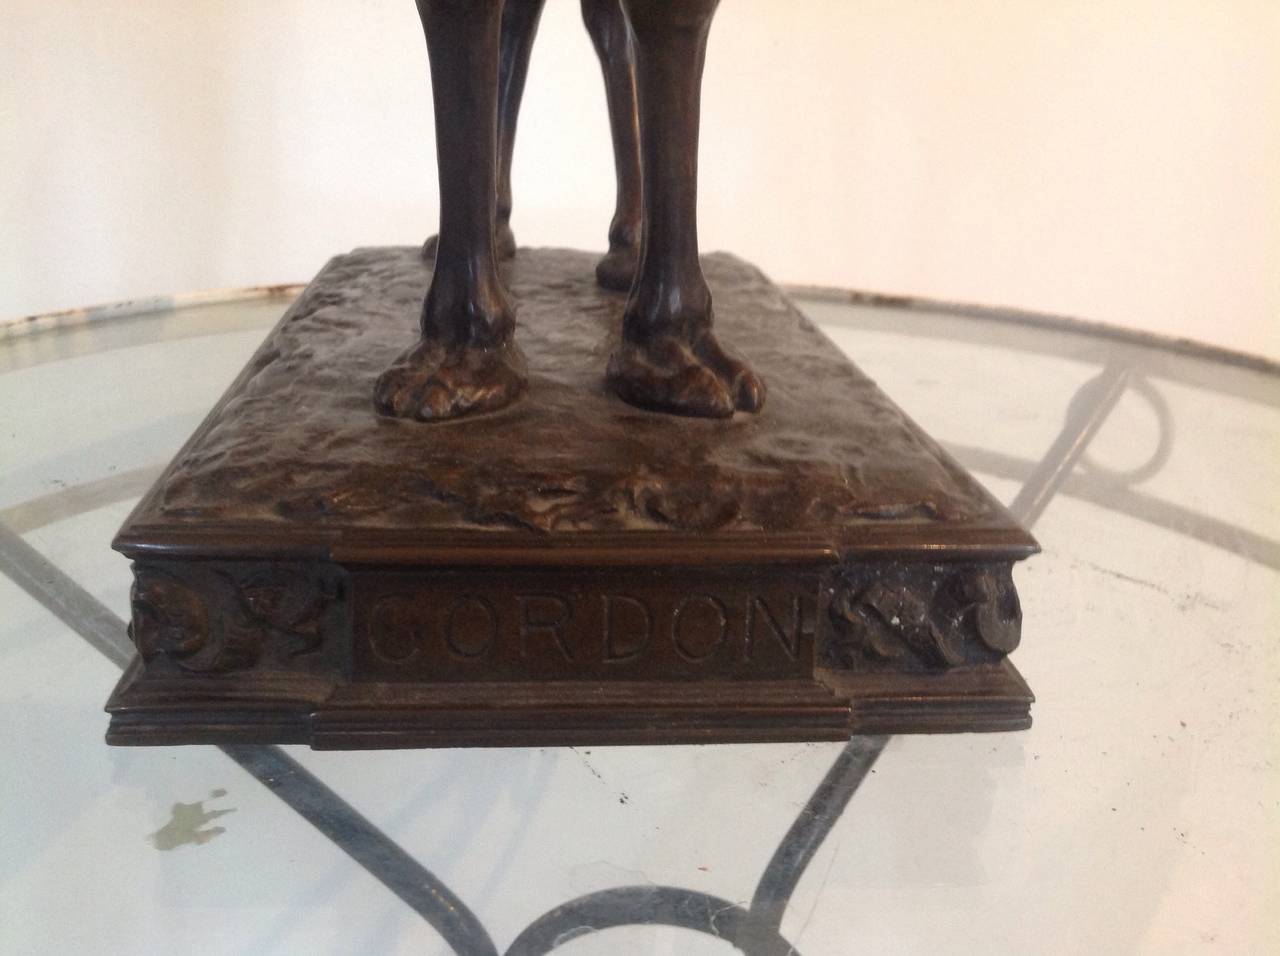 Late 19th Century Rare Bronze of General Gordon by Edward Onslow Ford dated 1890